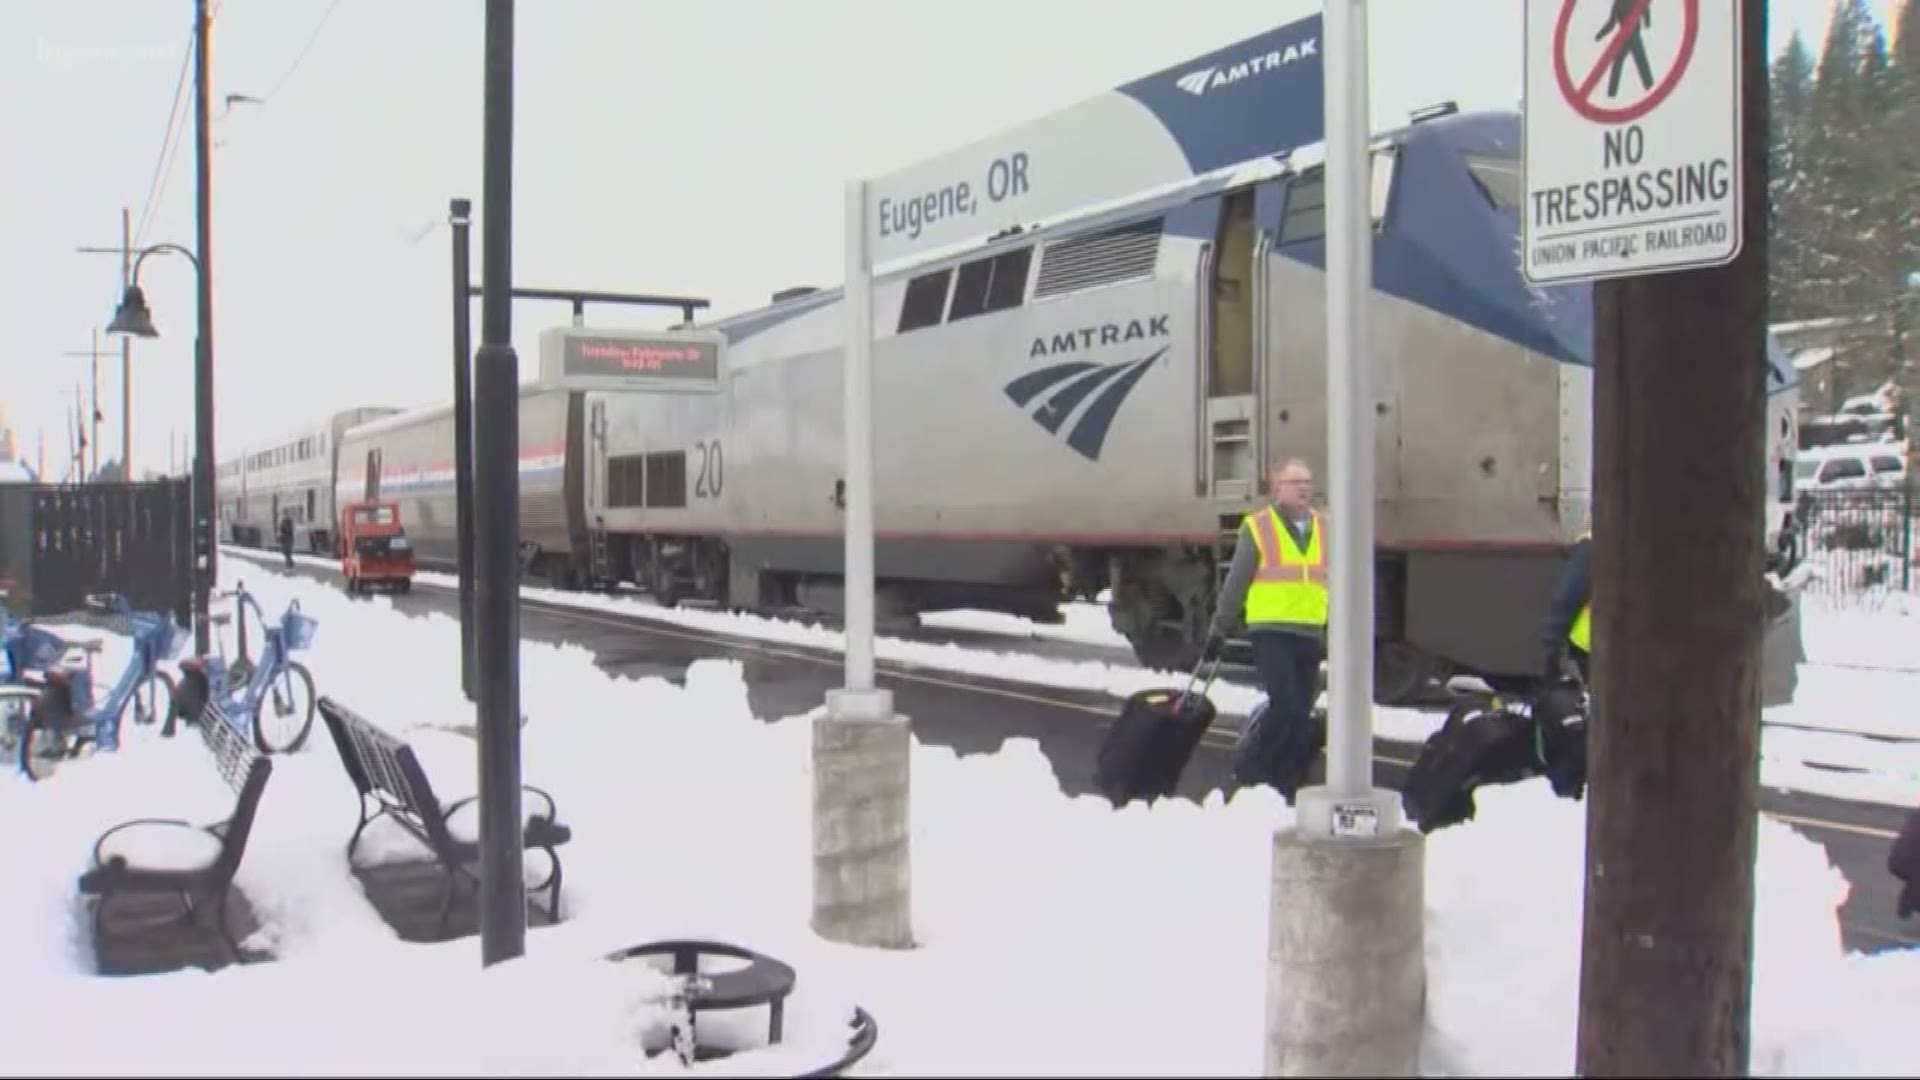 Passengers were stuck on the train for over 36 hours in Oakridge.